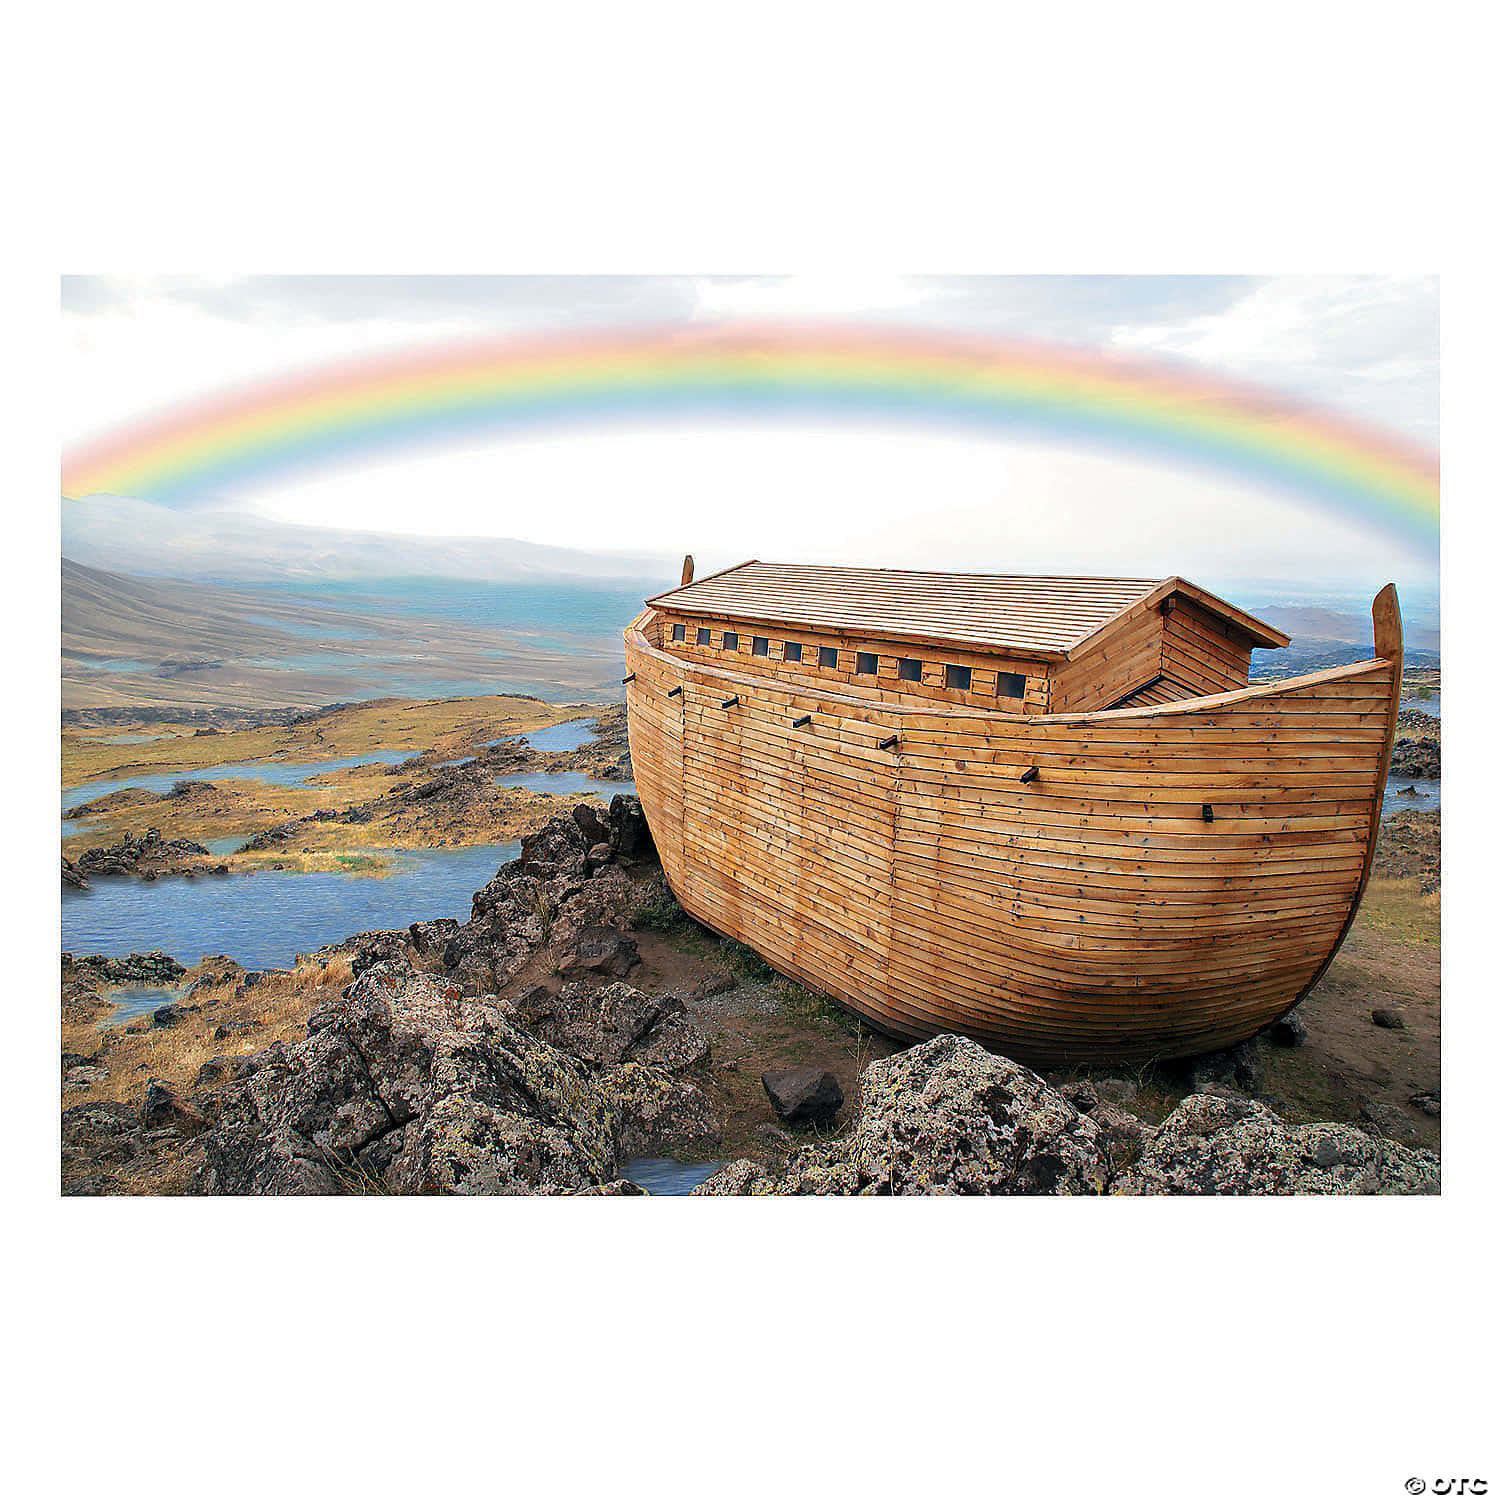 A faithful recreation of the biblical Noah's Ark towering over the waters.